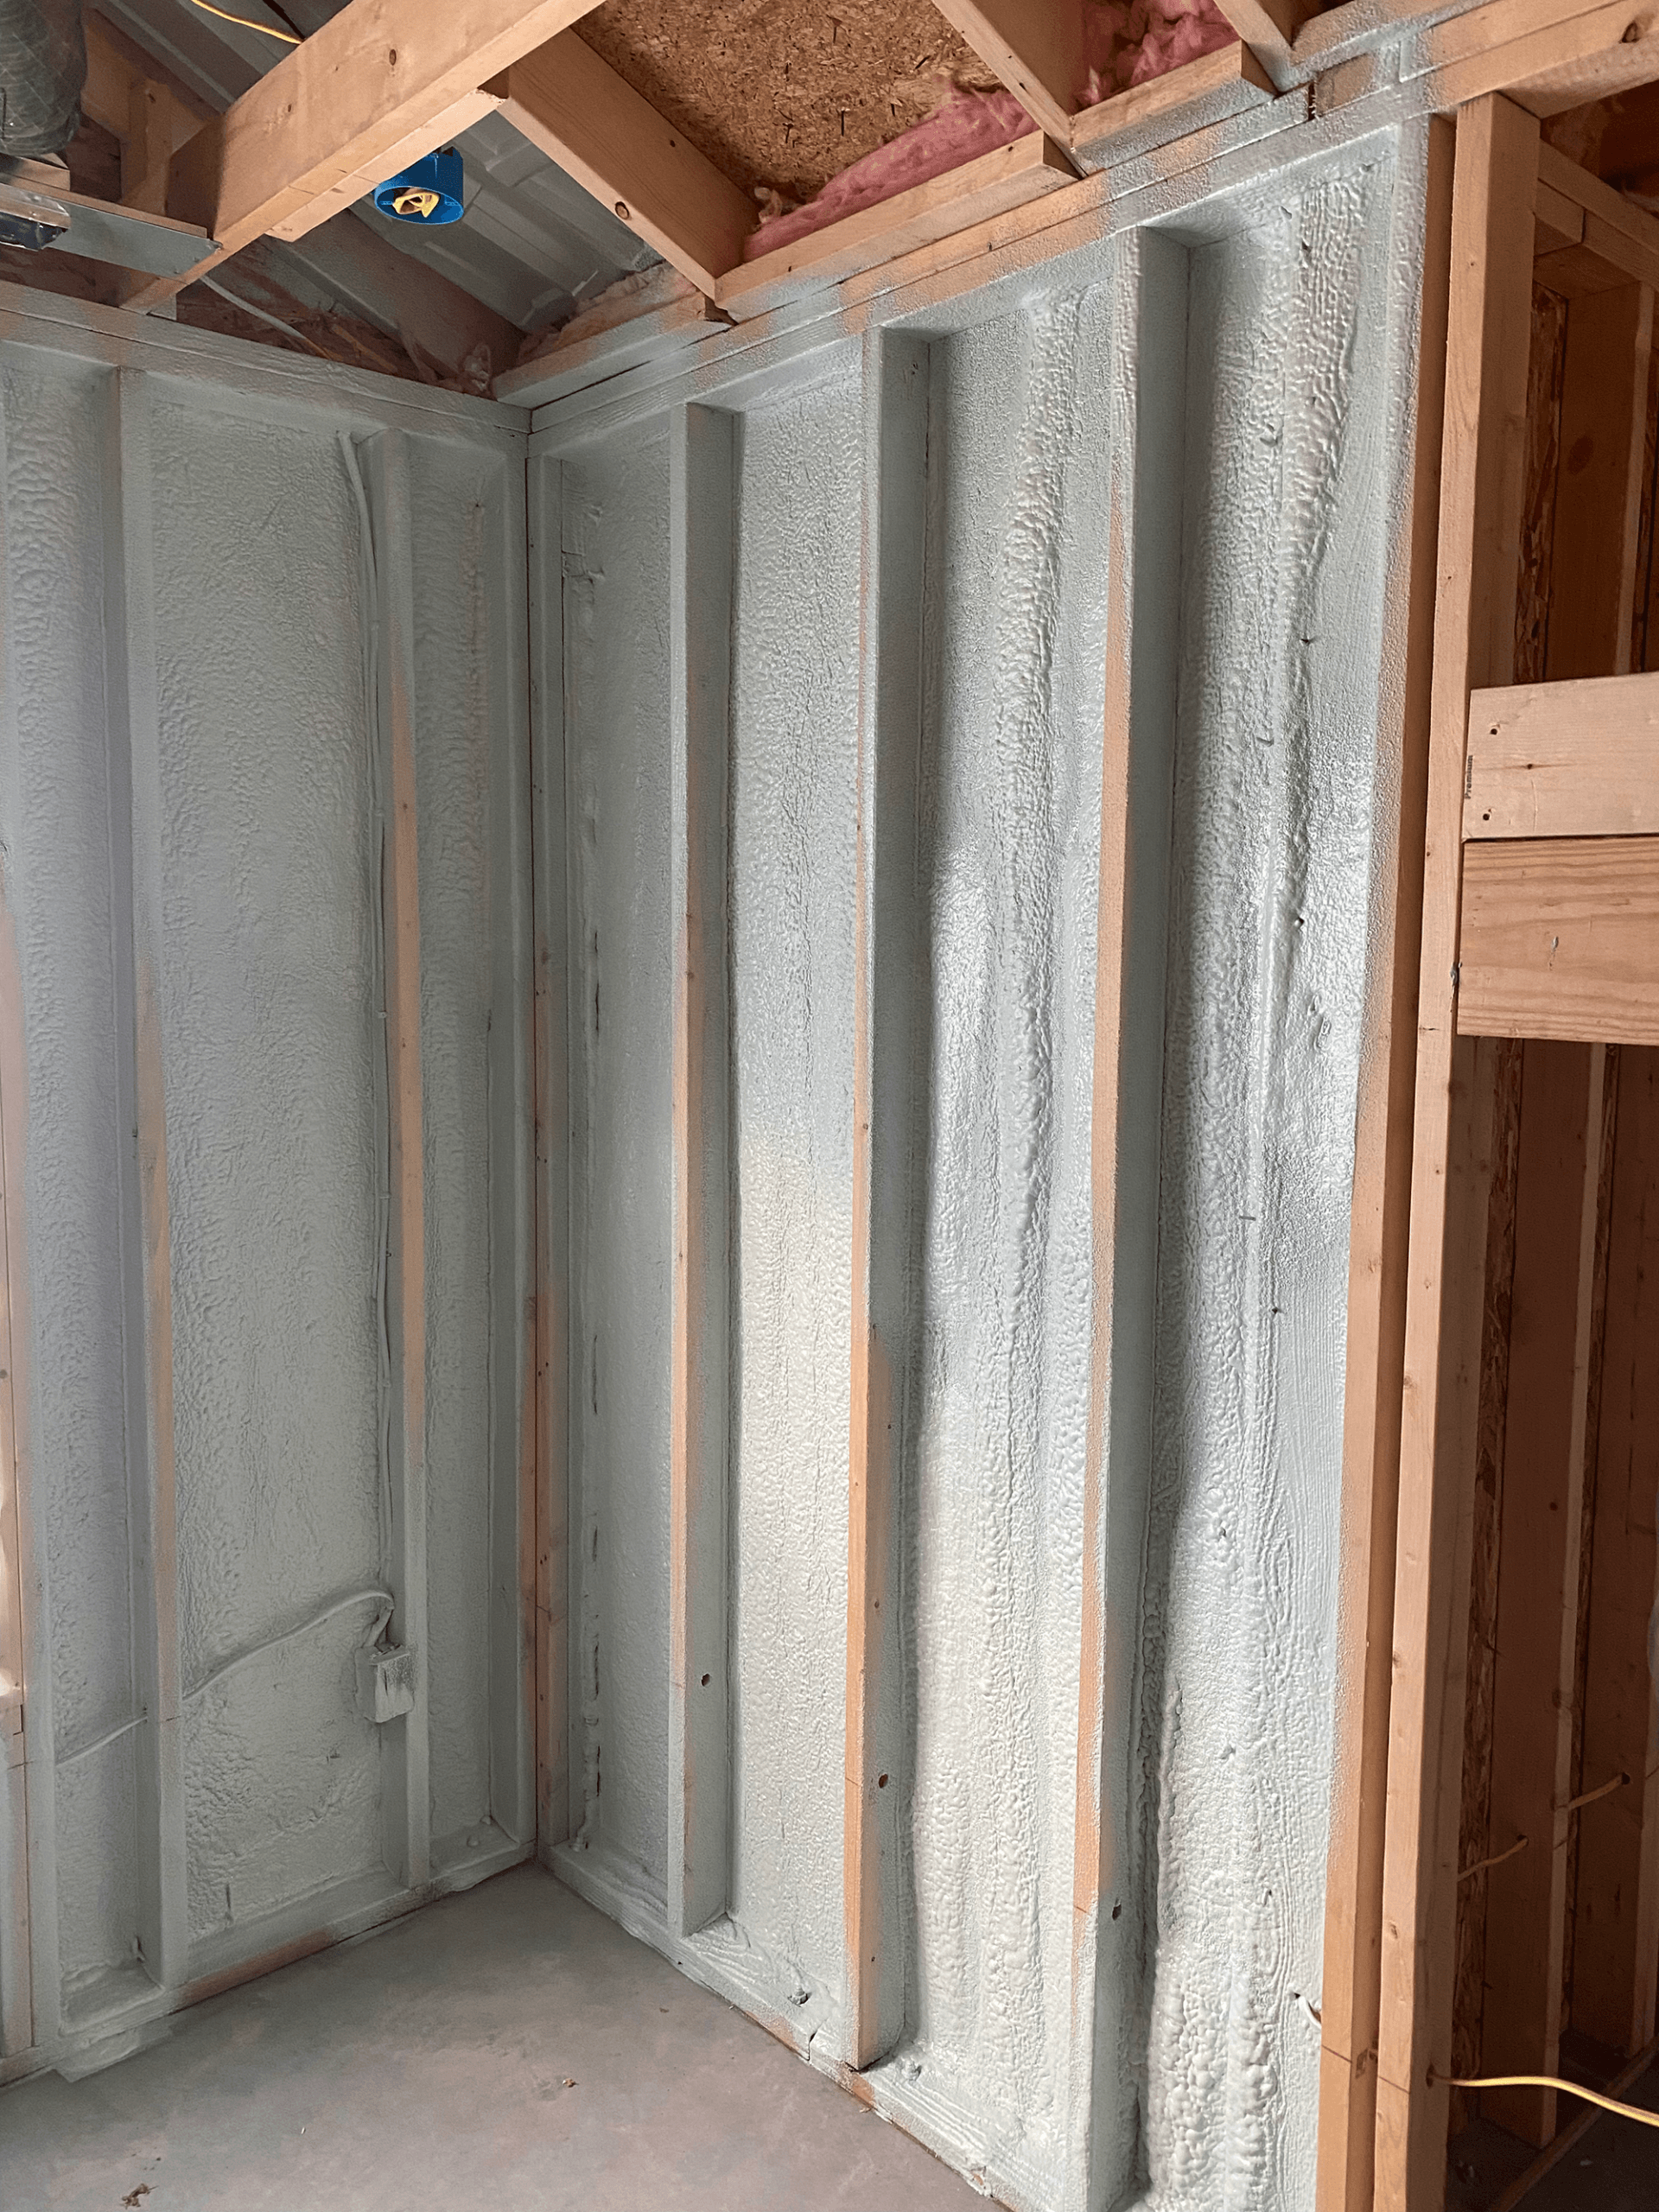 Get a Closer Look at the Benefits of Cellulose Insulation in Mid-MO With DK Spray Foam & Insulation